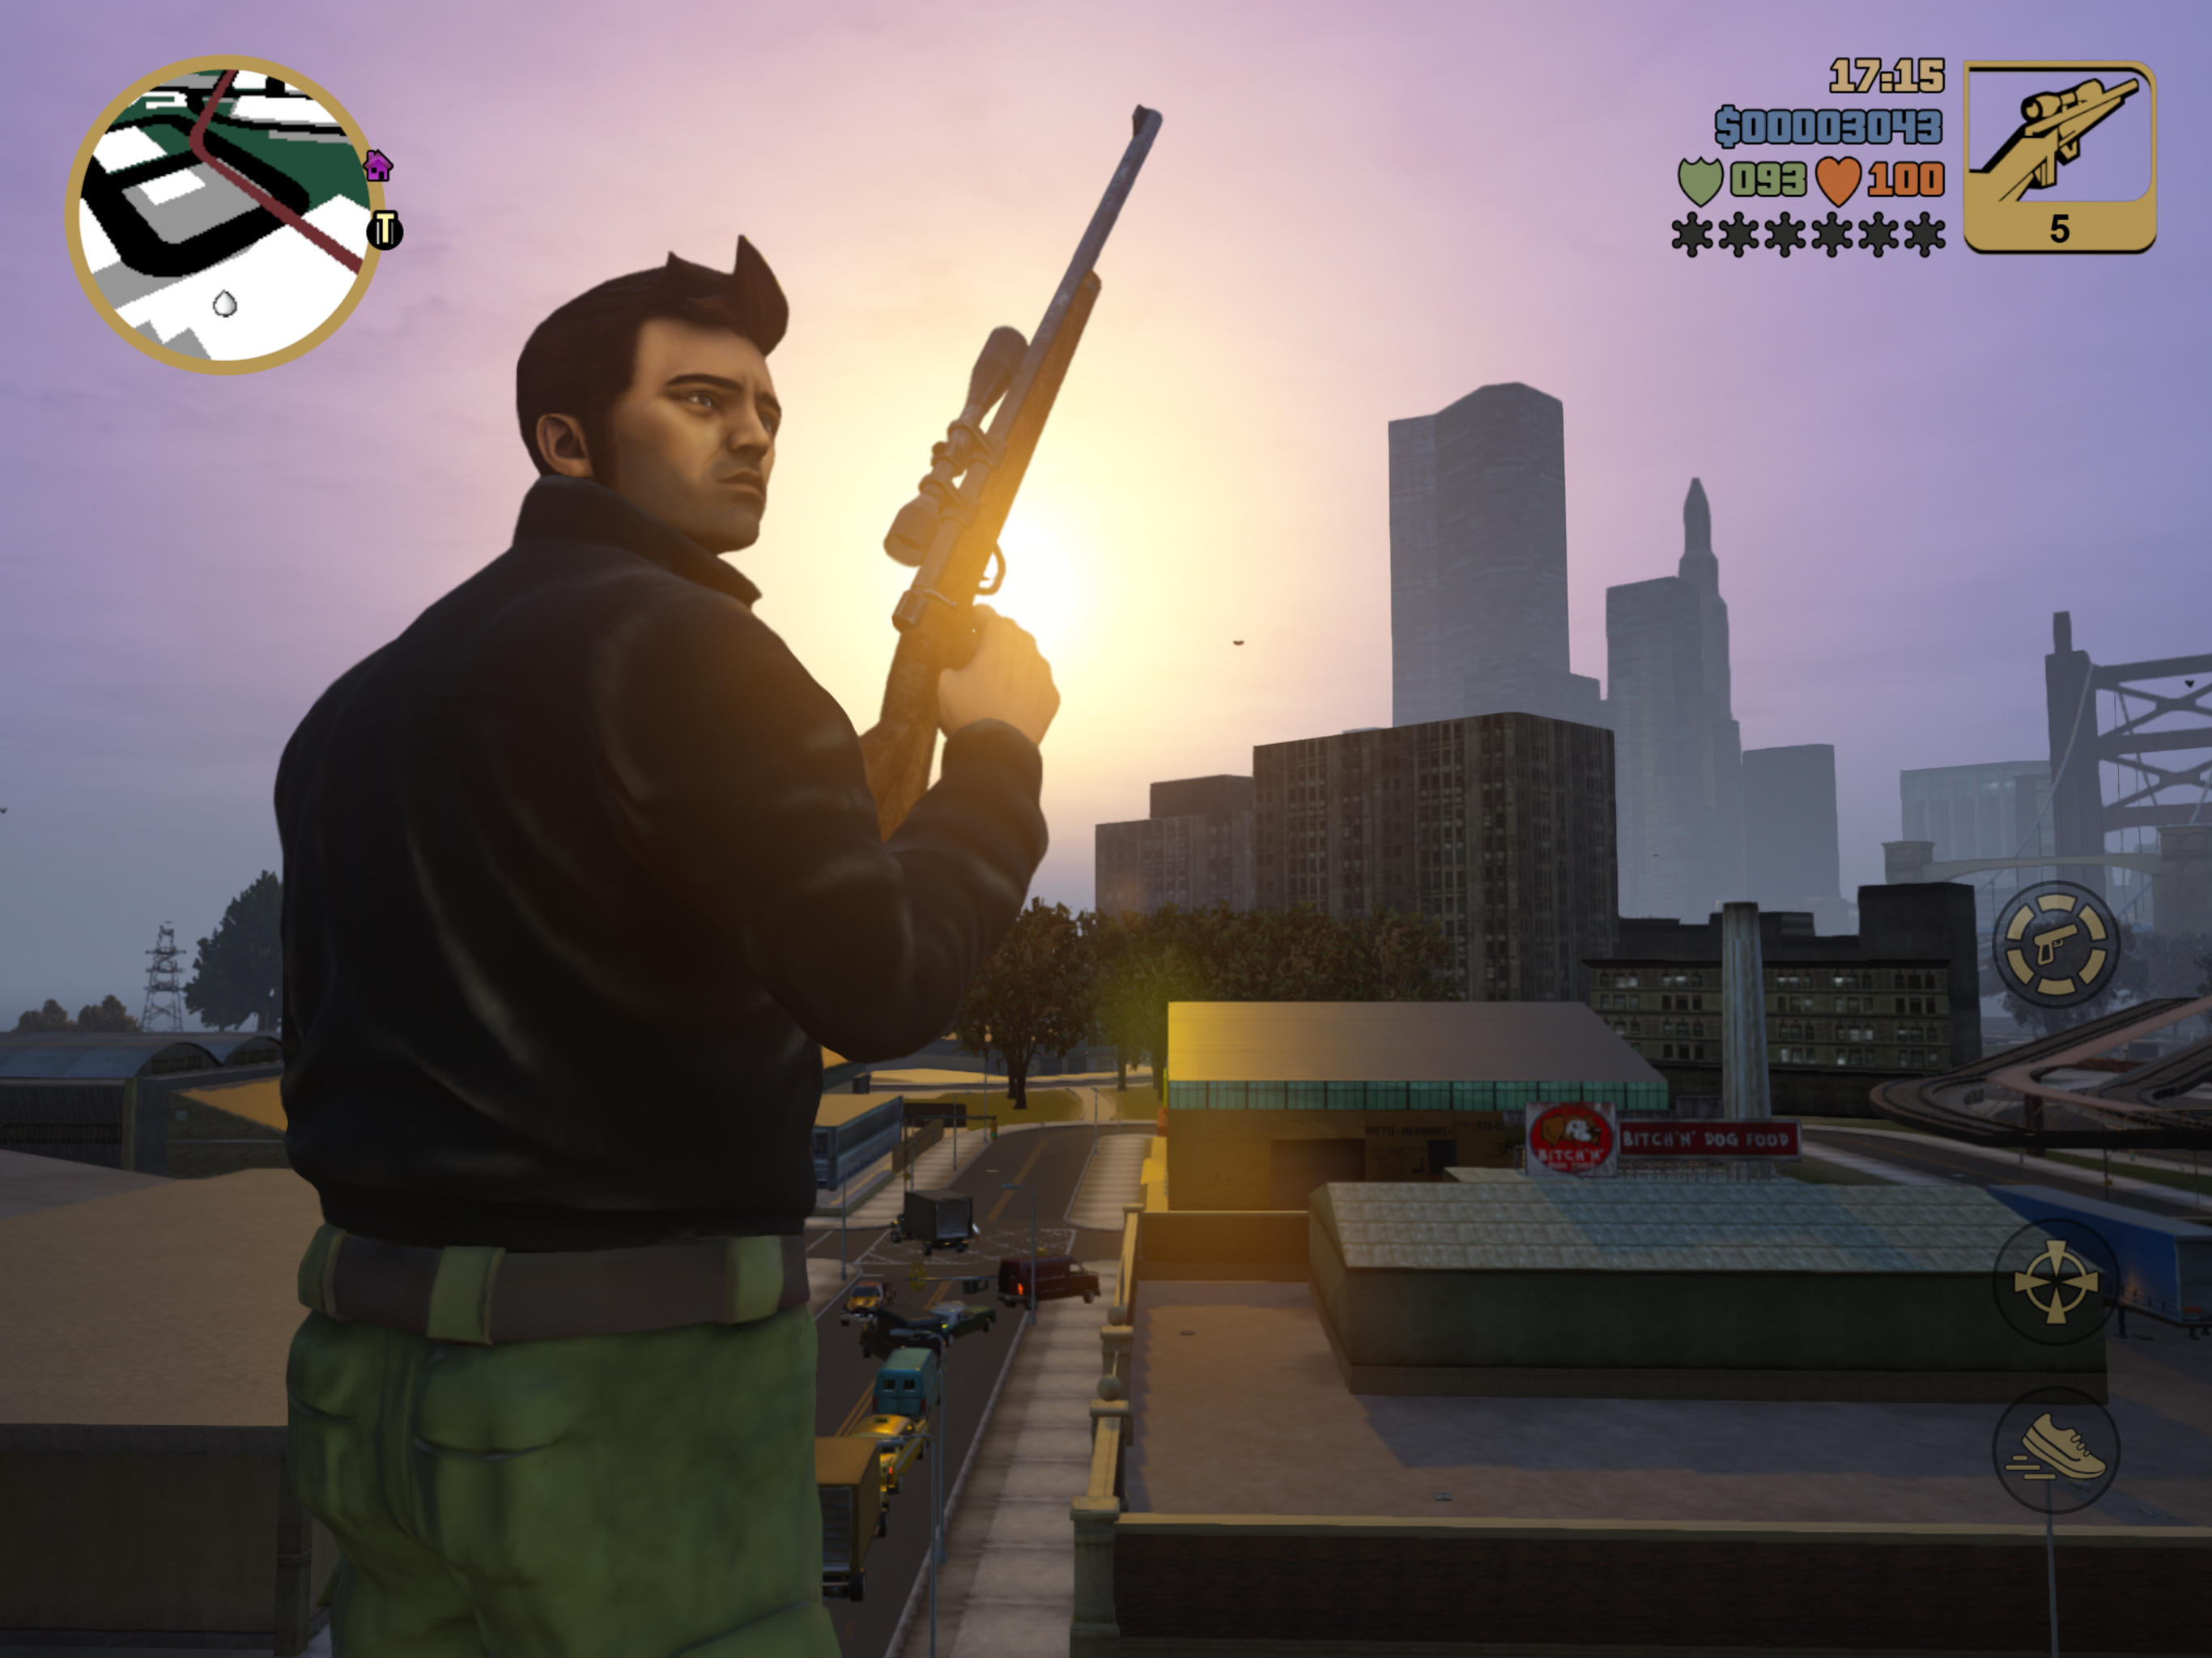 Grand Theft Auto III - The Definitive Edition Box Shot for PC